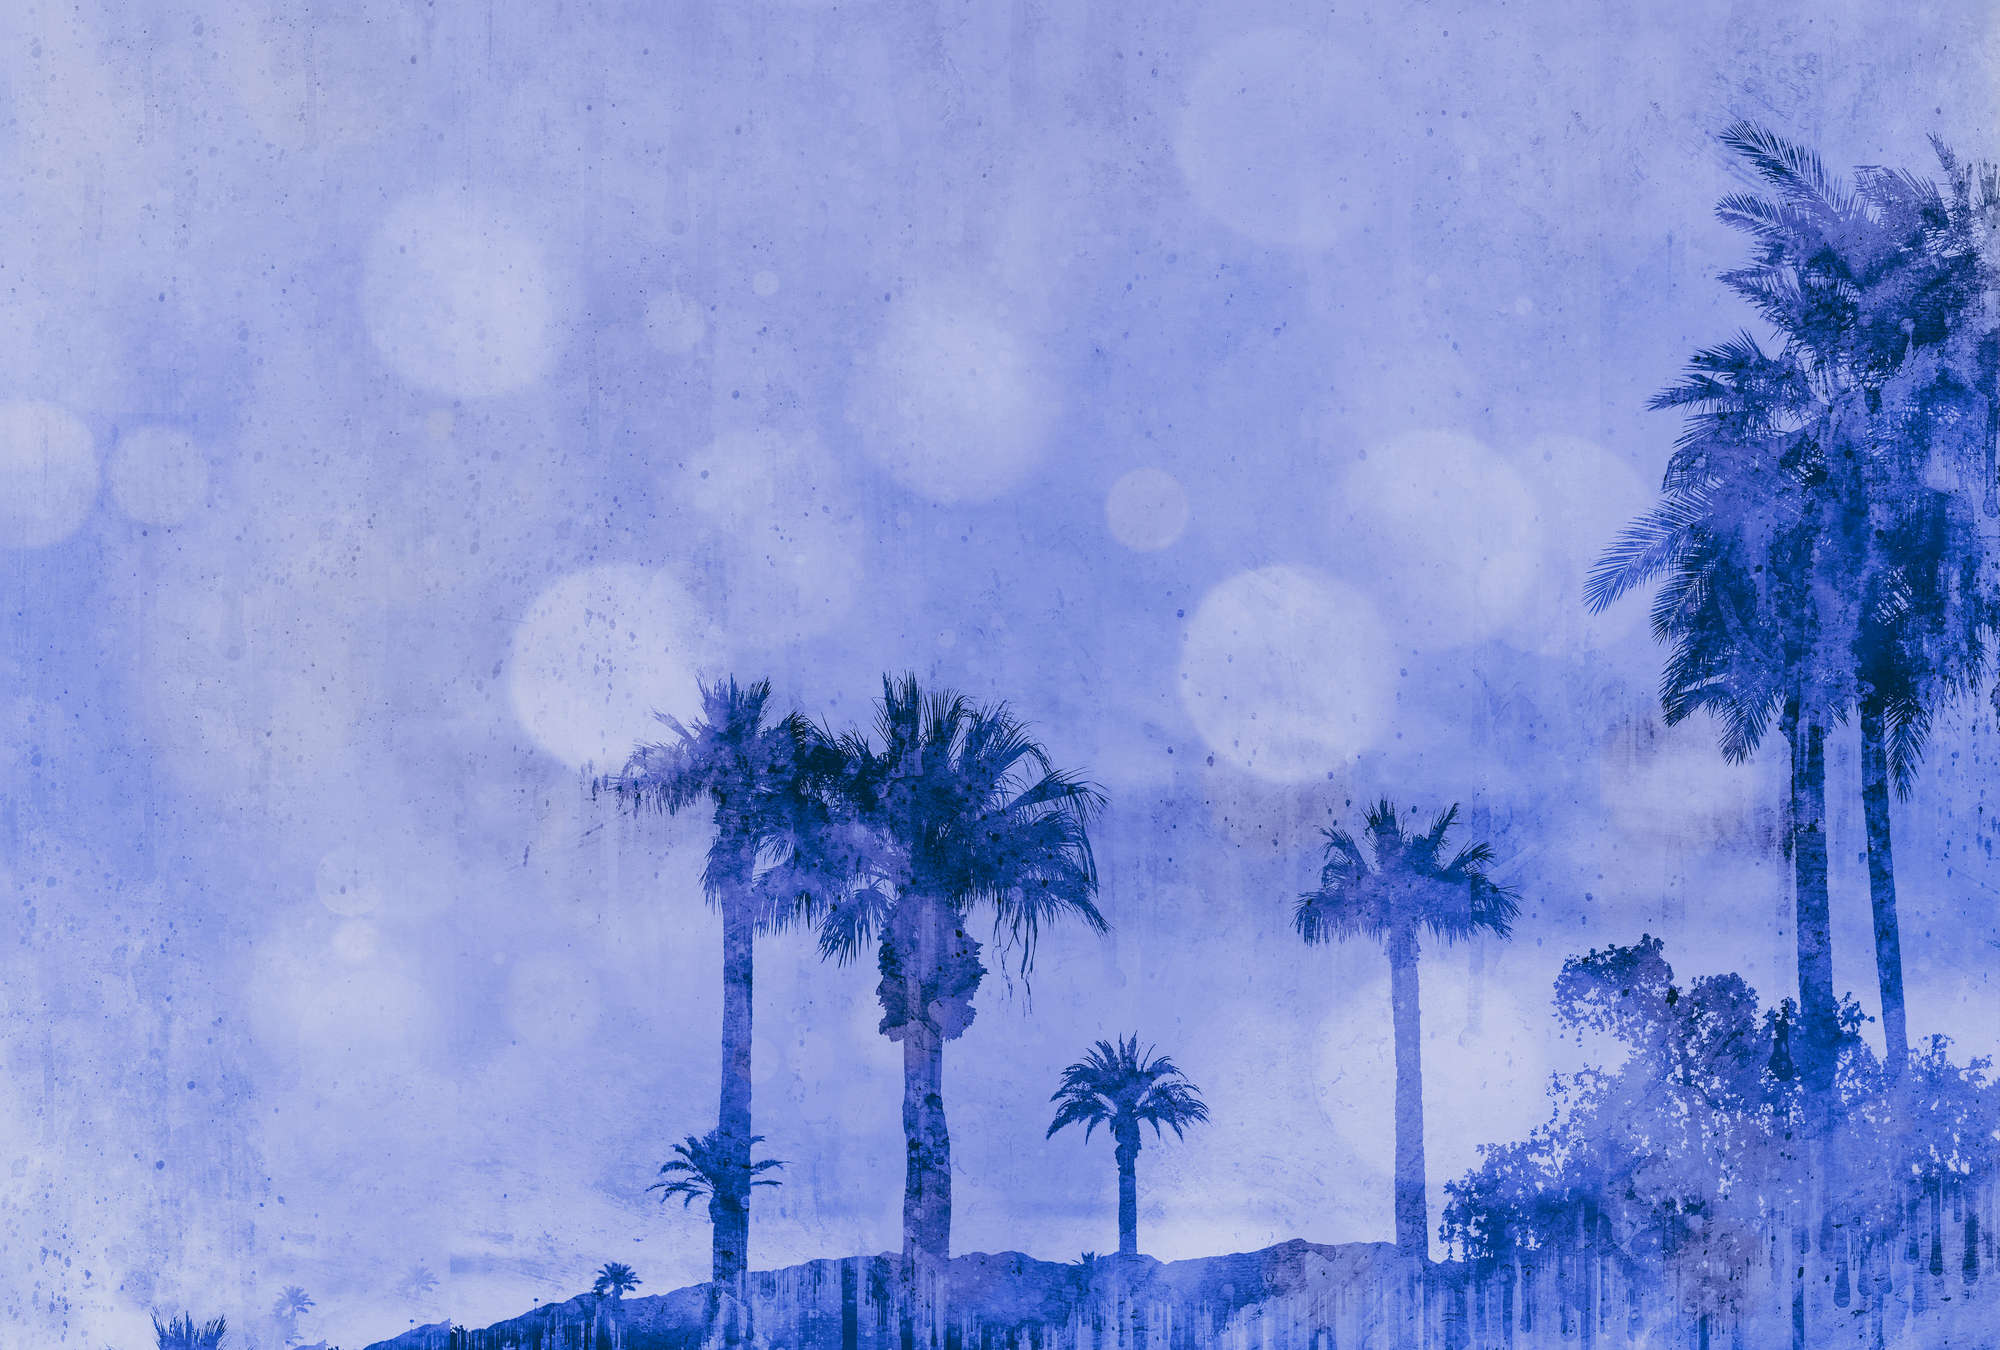             Photo wallpaper palm trees watercolour with texture pattern - blue, purple
        